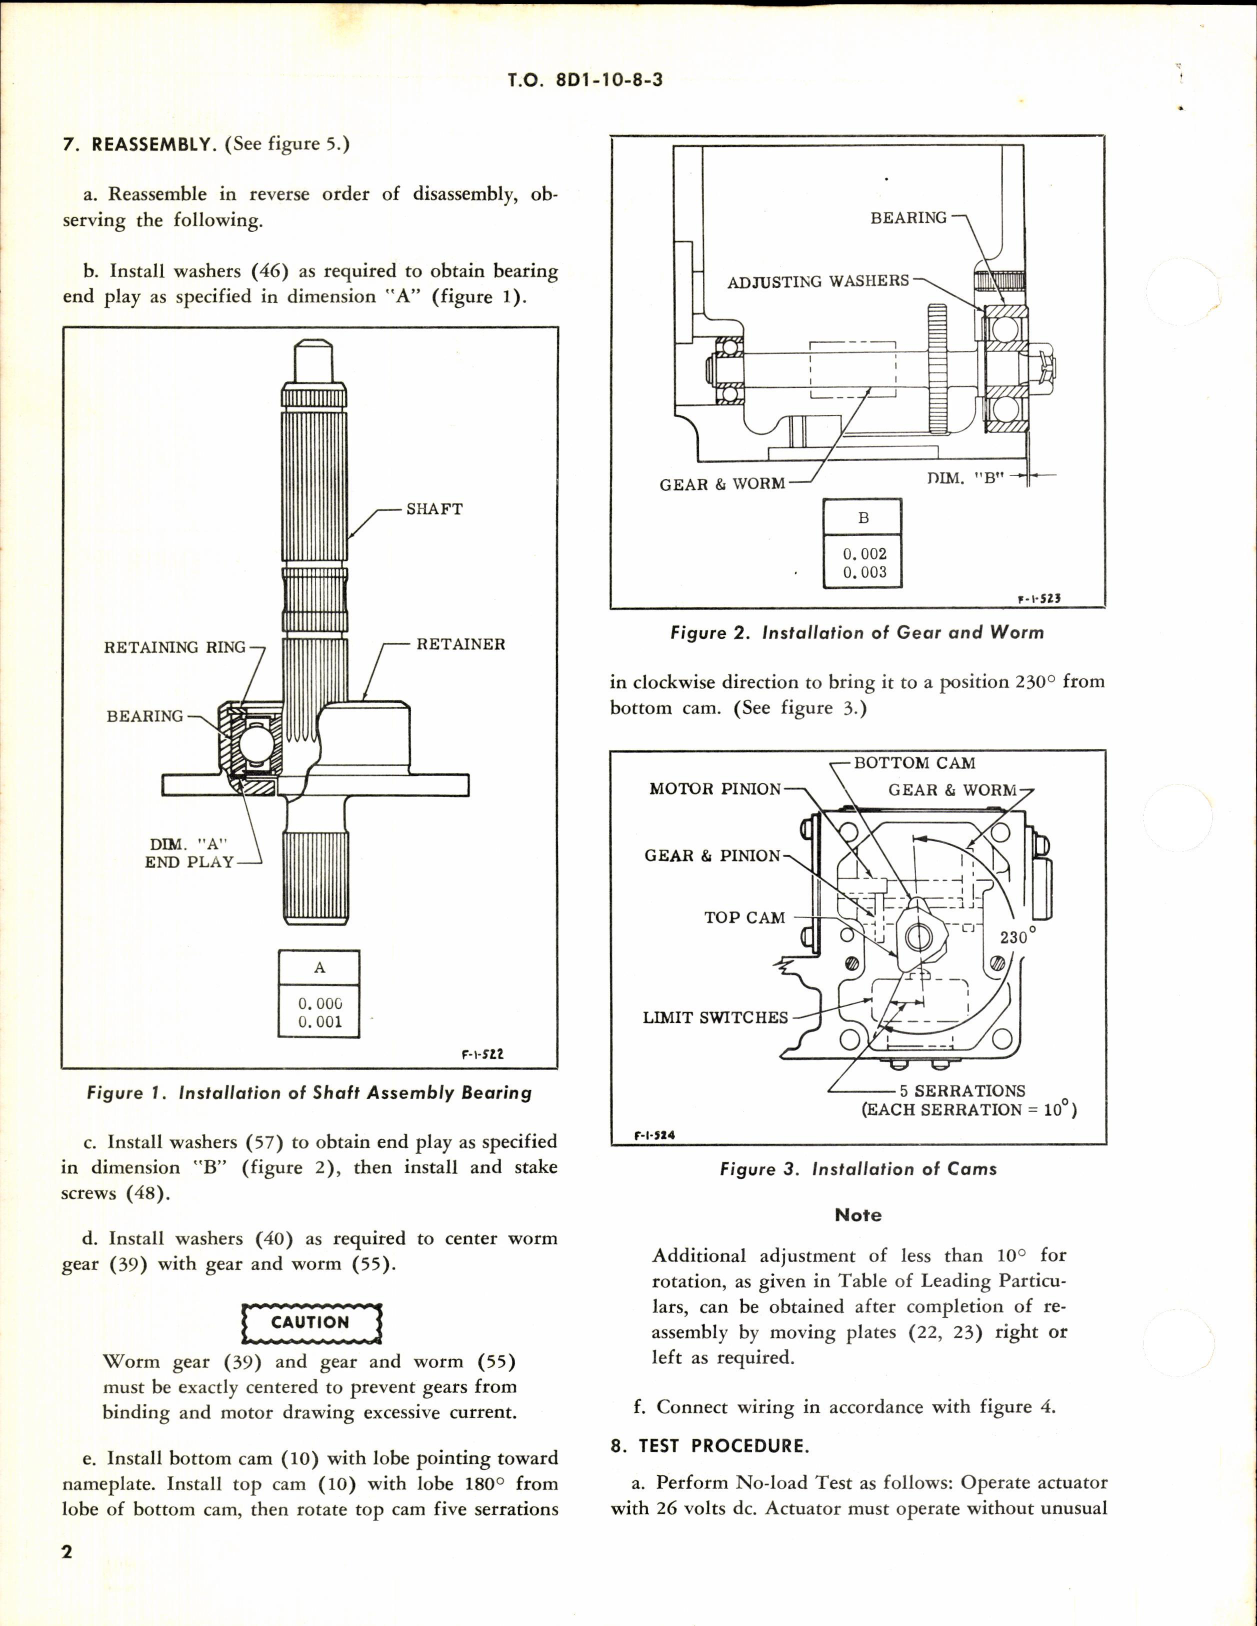 Sample page 2 from AirCorps Library document: Overhaul Instructions with Parts Breakdown Torque Actuator